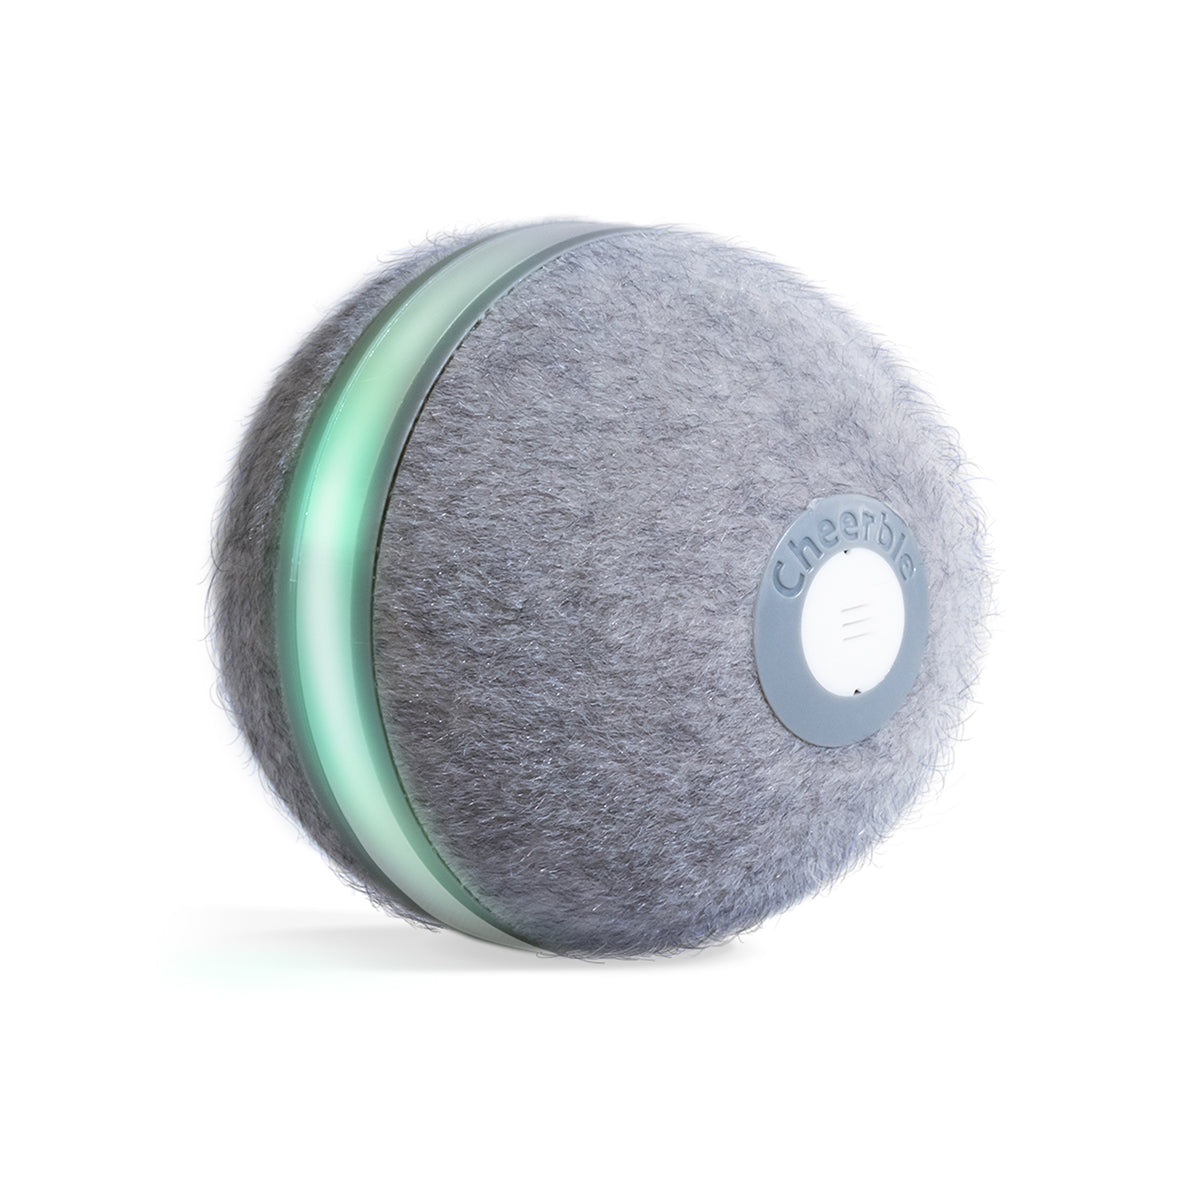 Cheerble Wicked Ball - Artificial Wool